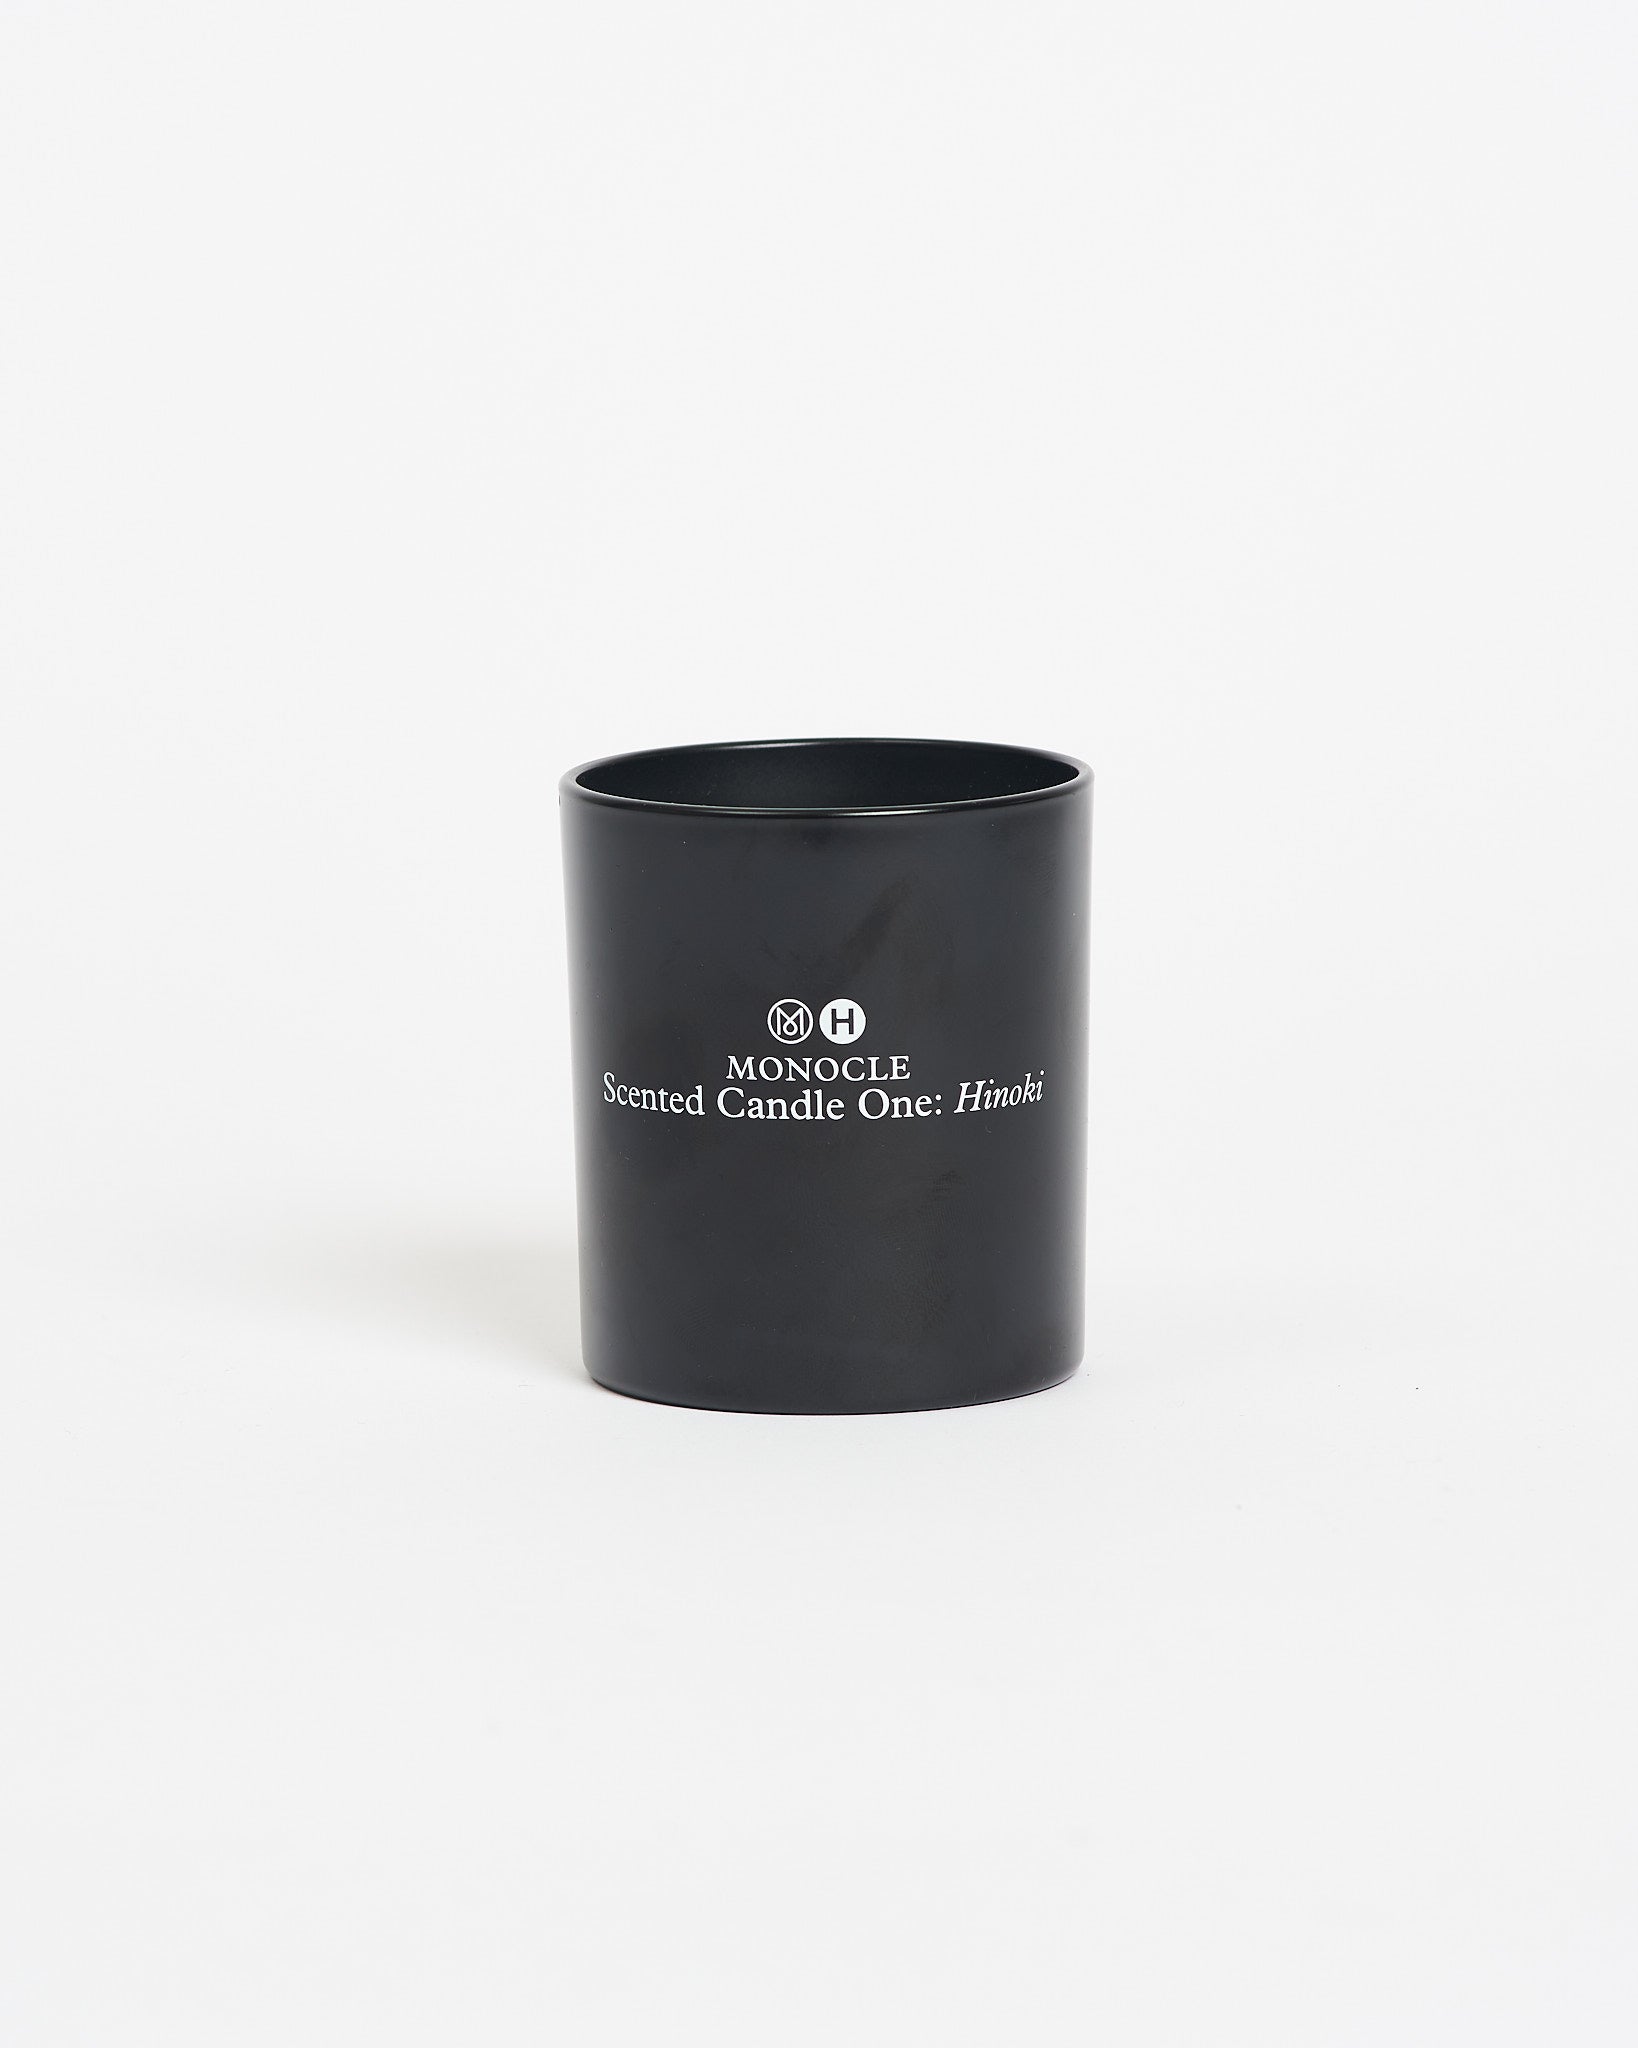 Monocle Candle #1 in Hinoki